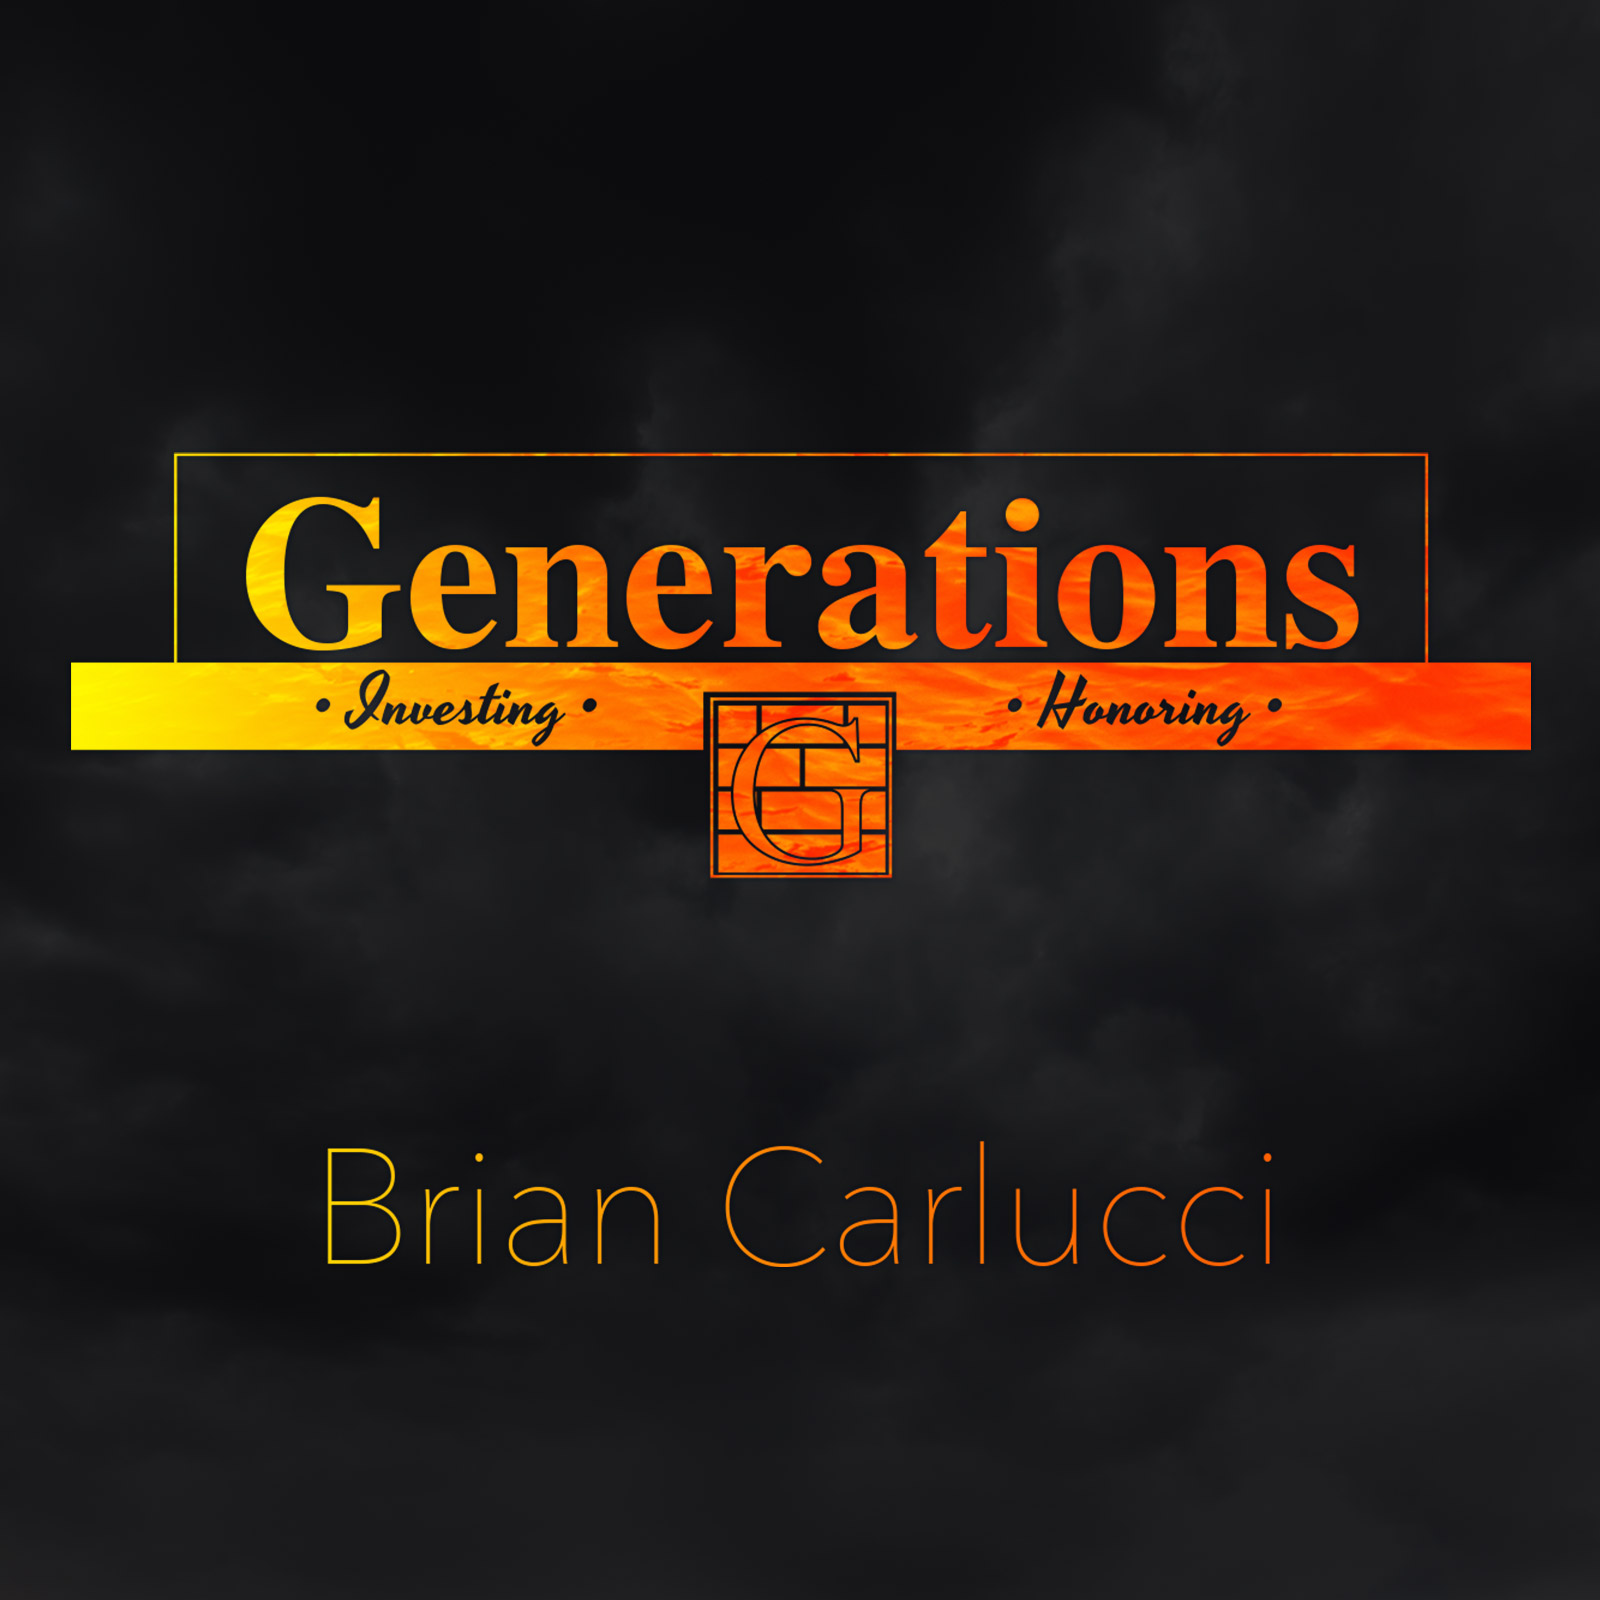 Covenant Journey of Faith ~ Pastor Brian Carlucci